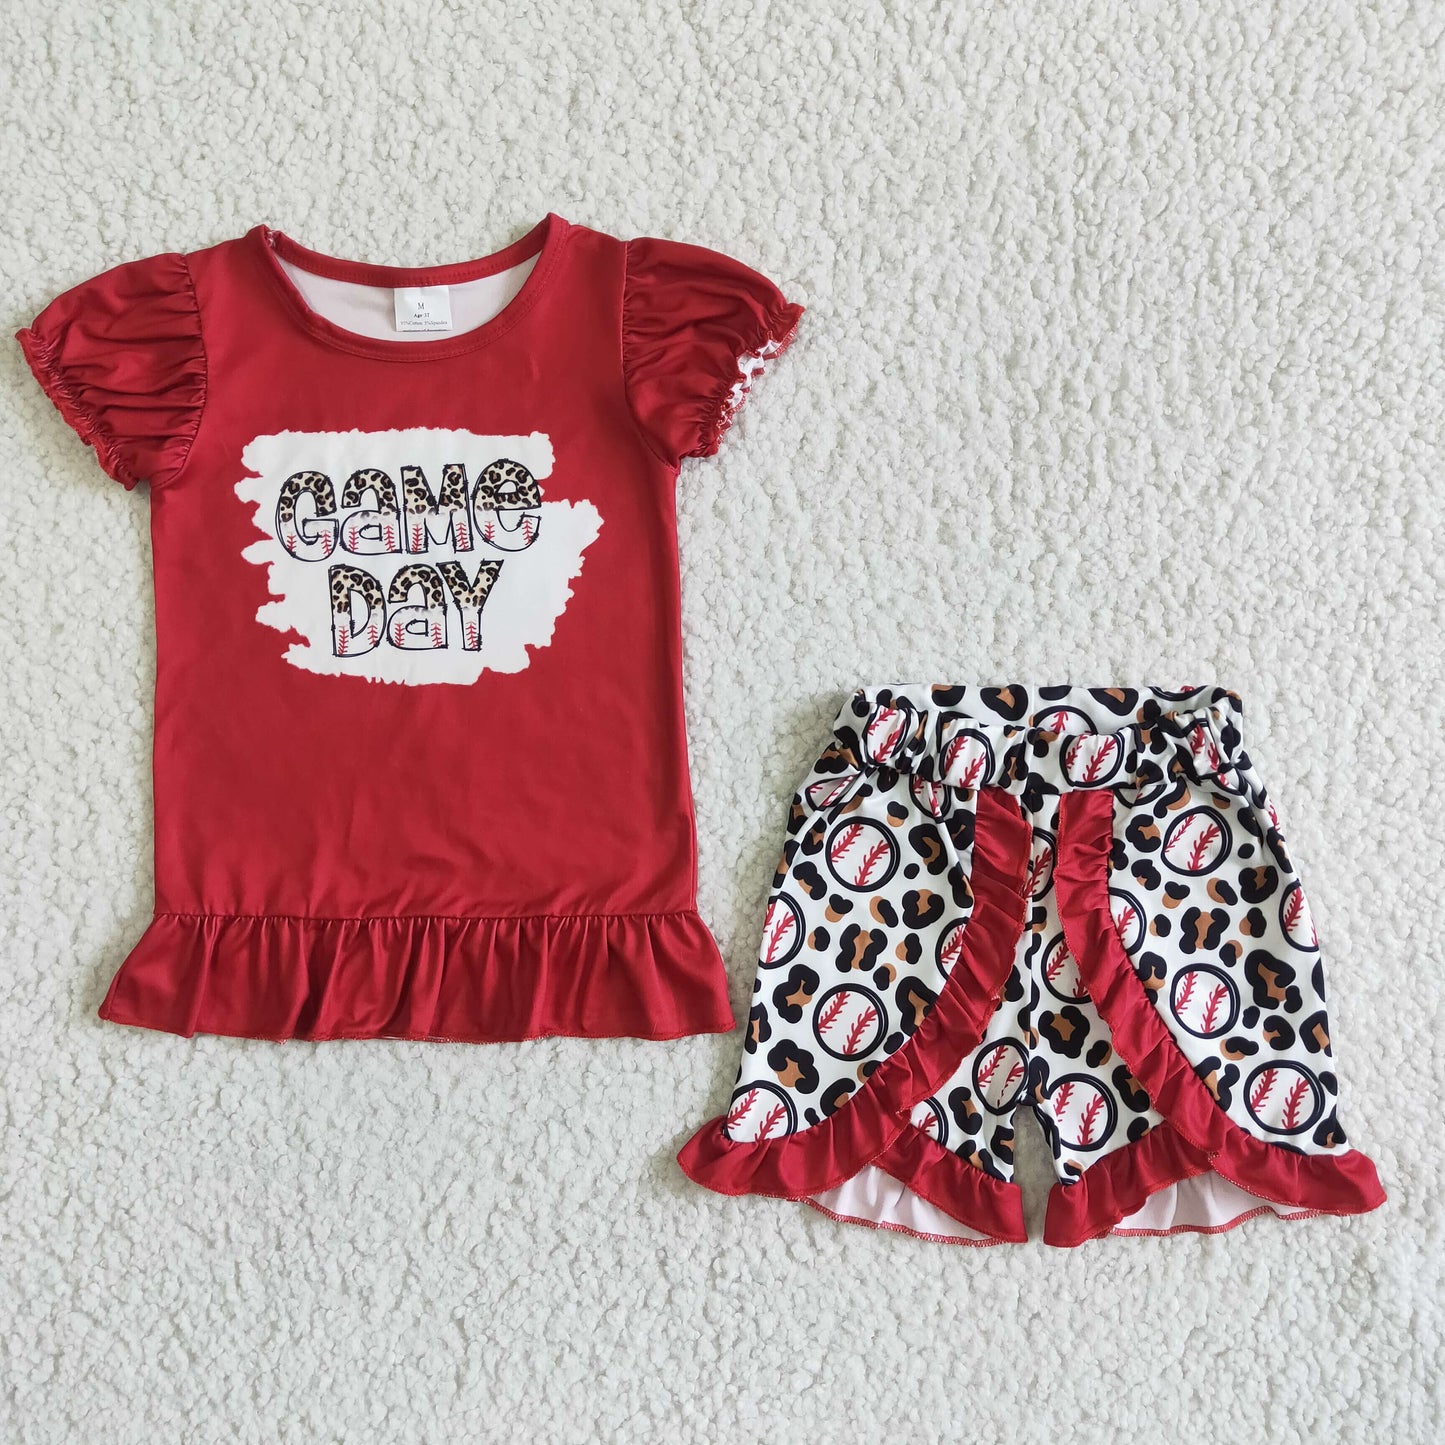 Game day shirt baseball leopard shorts girls boutique clothes